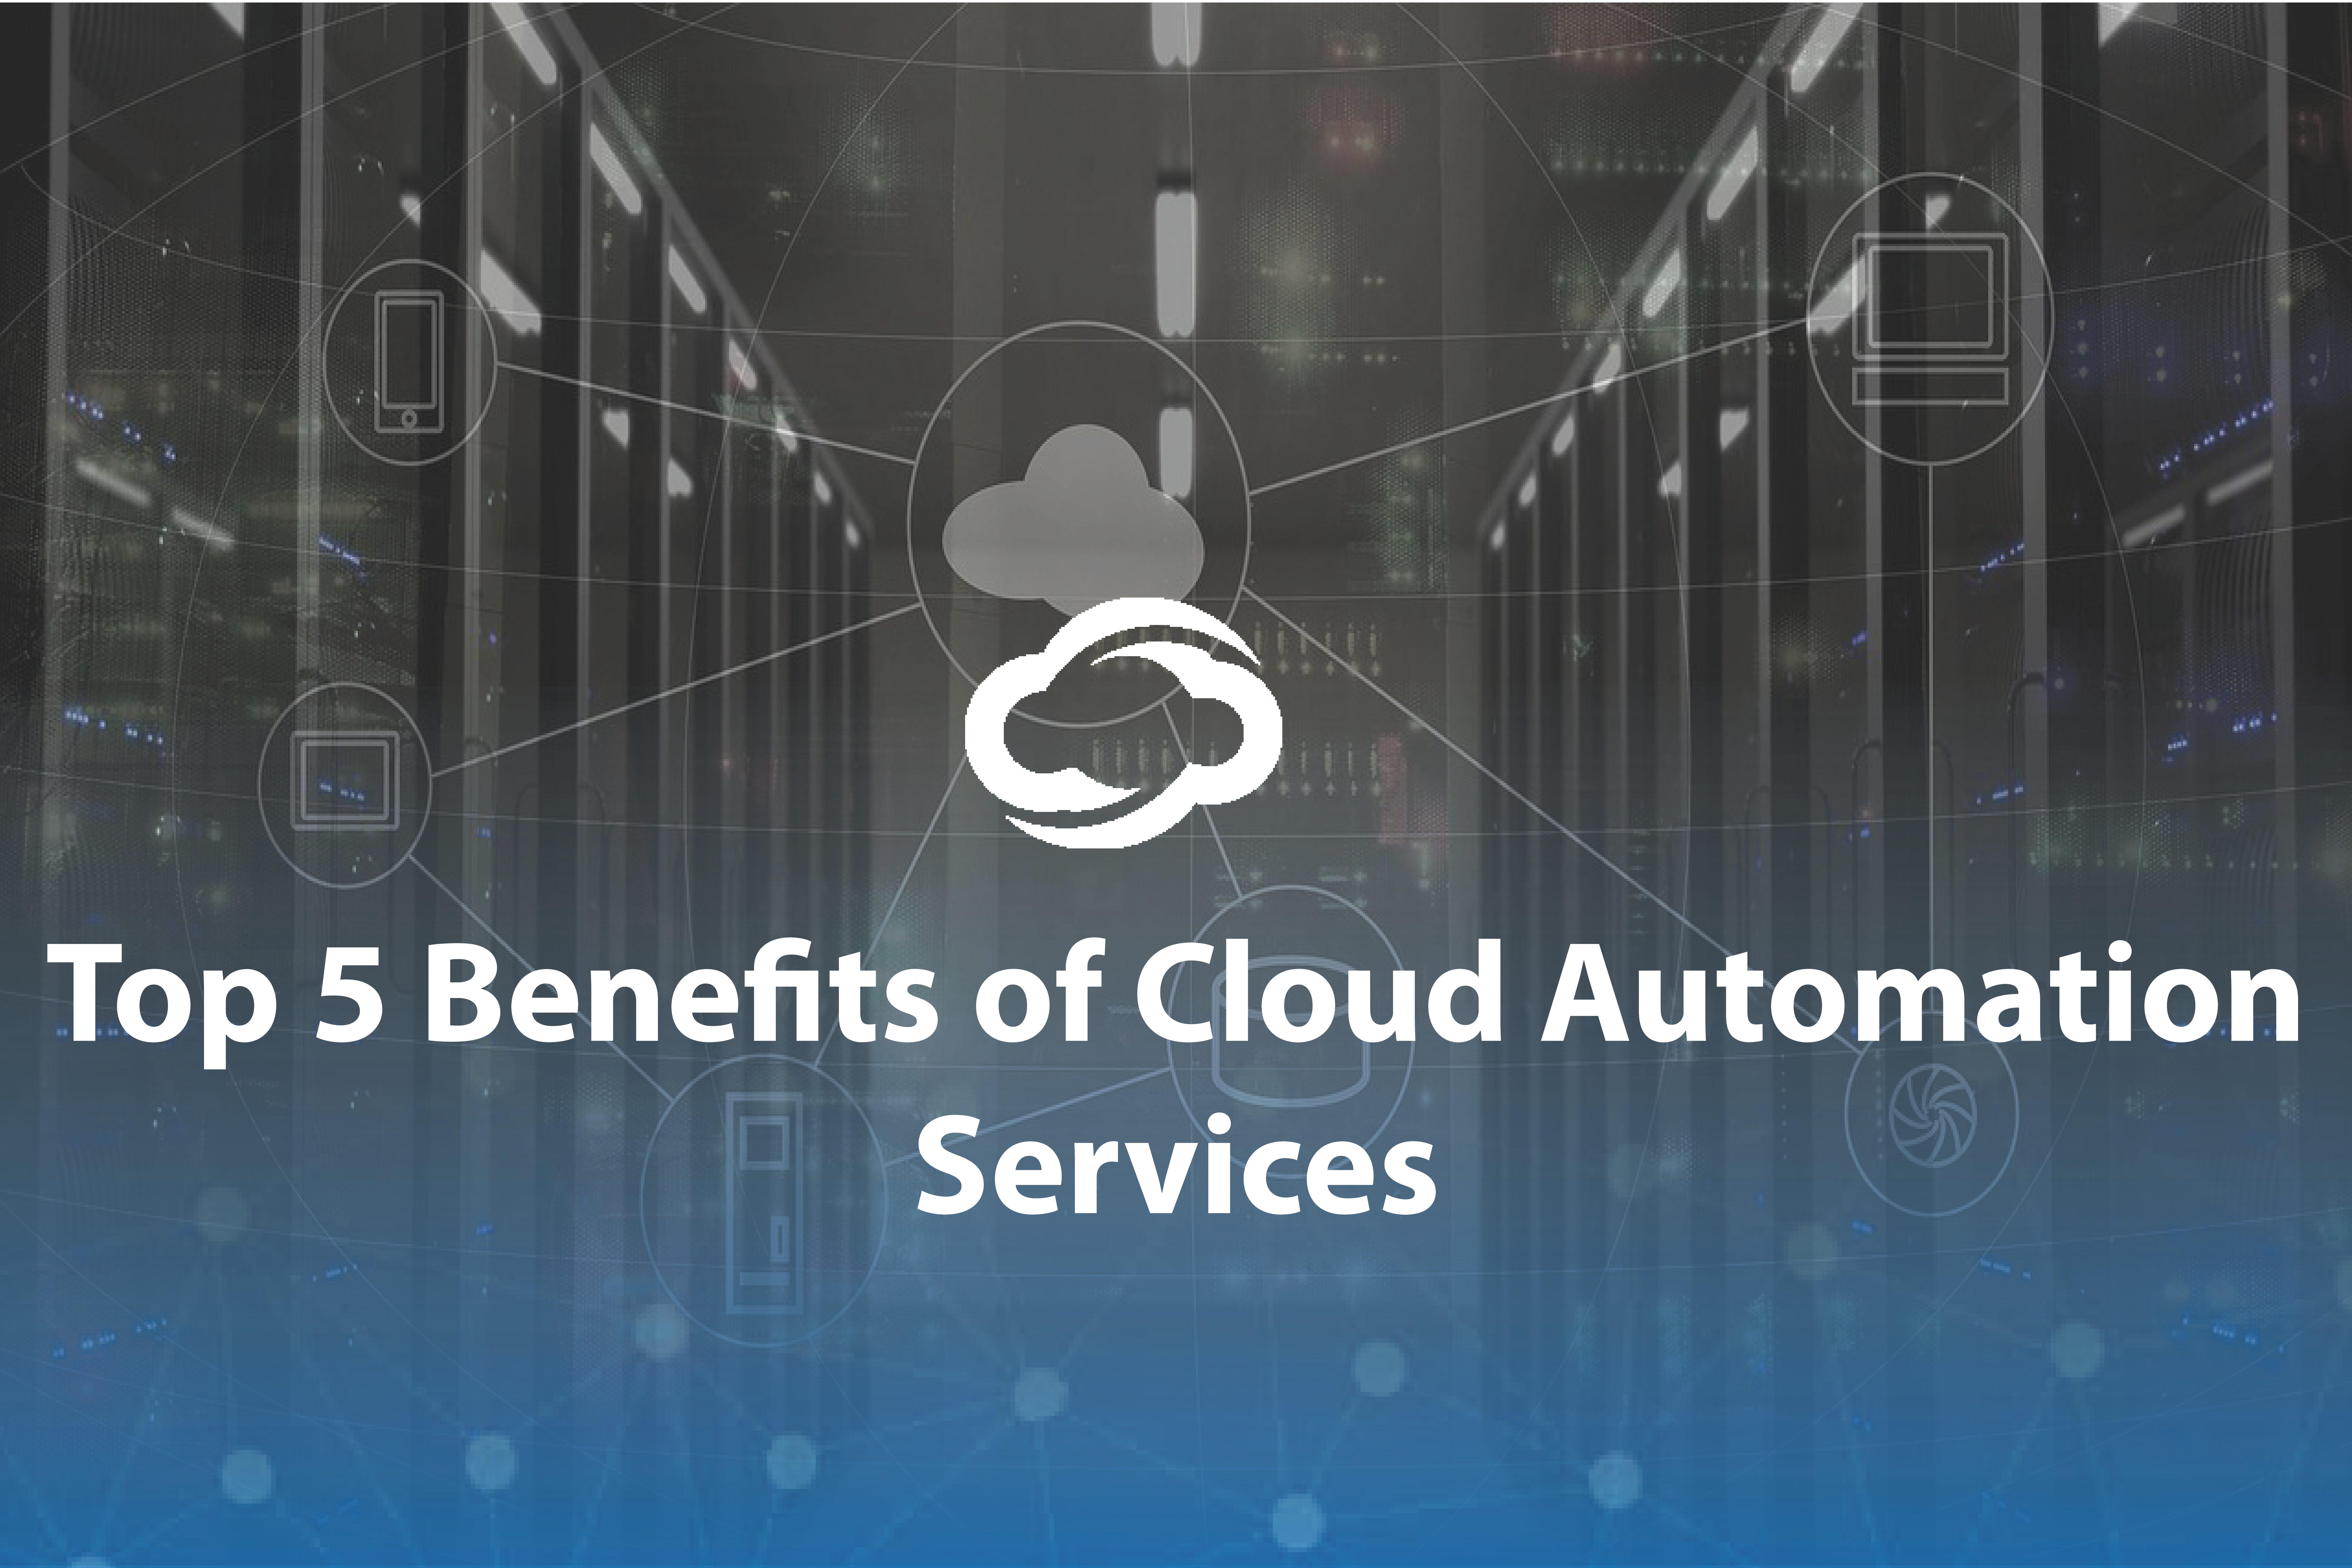 Top 5 Benefits of Cloud Automation Services blog image 1